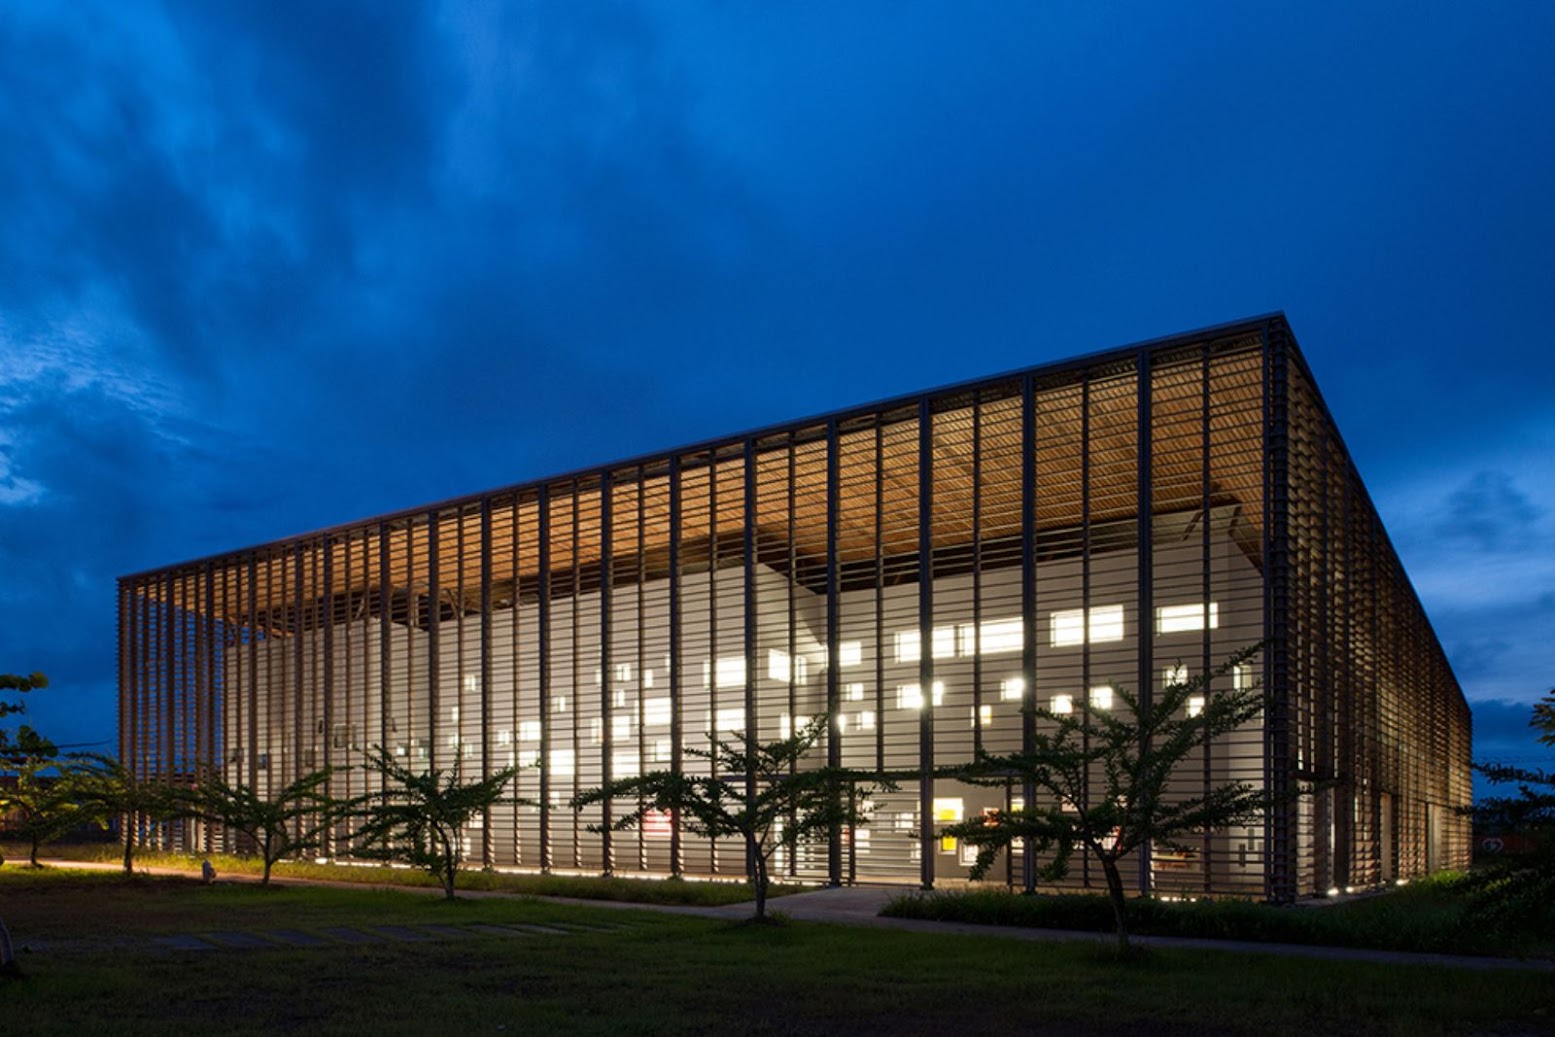 Caienna, Guiana Francese: [UNIVERSITY LIBRARY BY RH+ ARCHITECTURE]